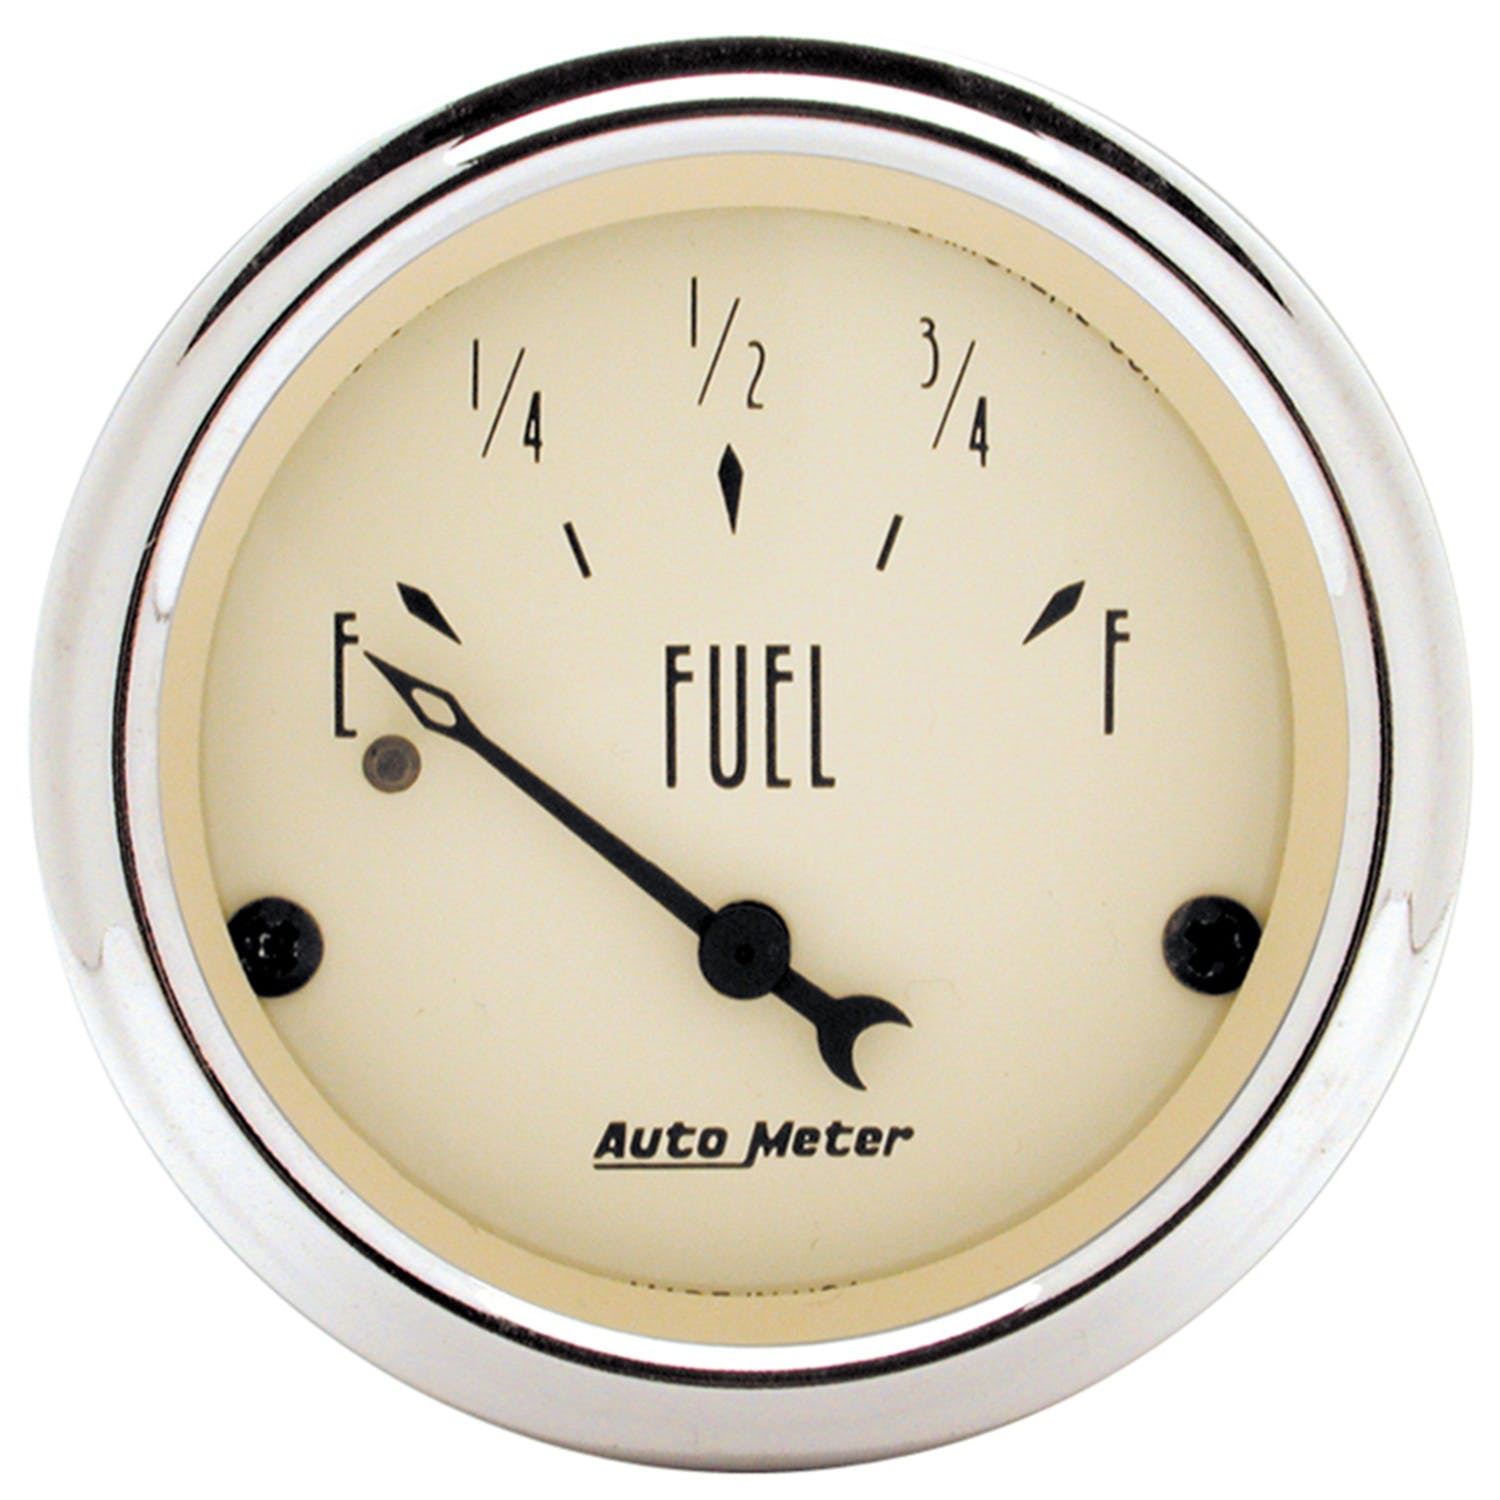 AutoMeter Products 1818 Gauge; Fuel Level; 2 1/16in.; 0OE to 30OF; Elec; Antique Beige